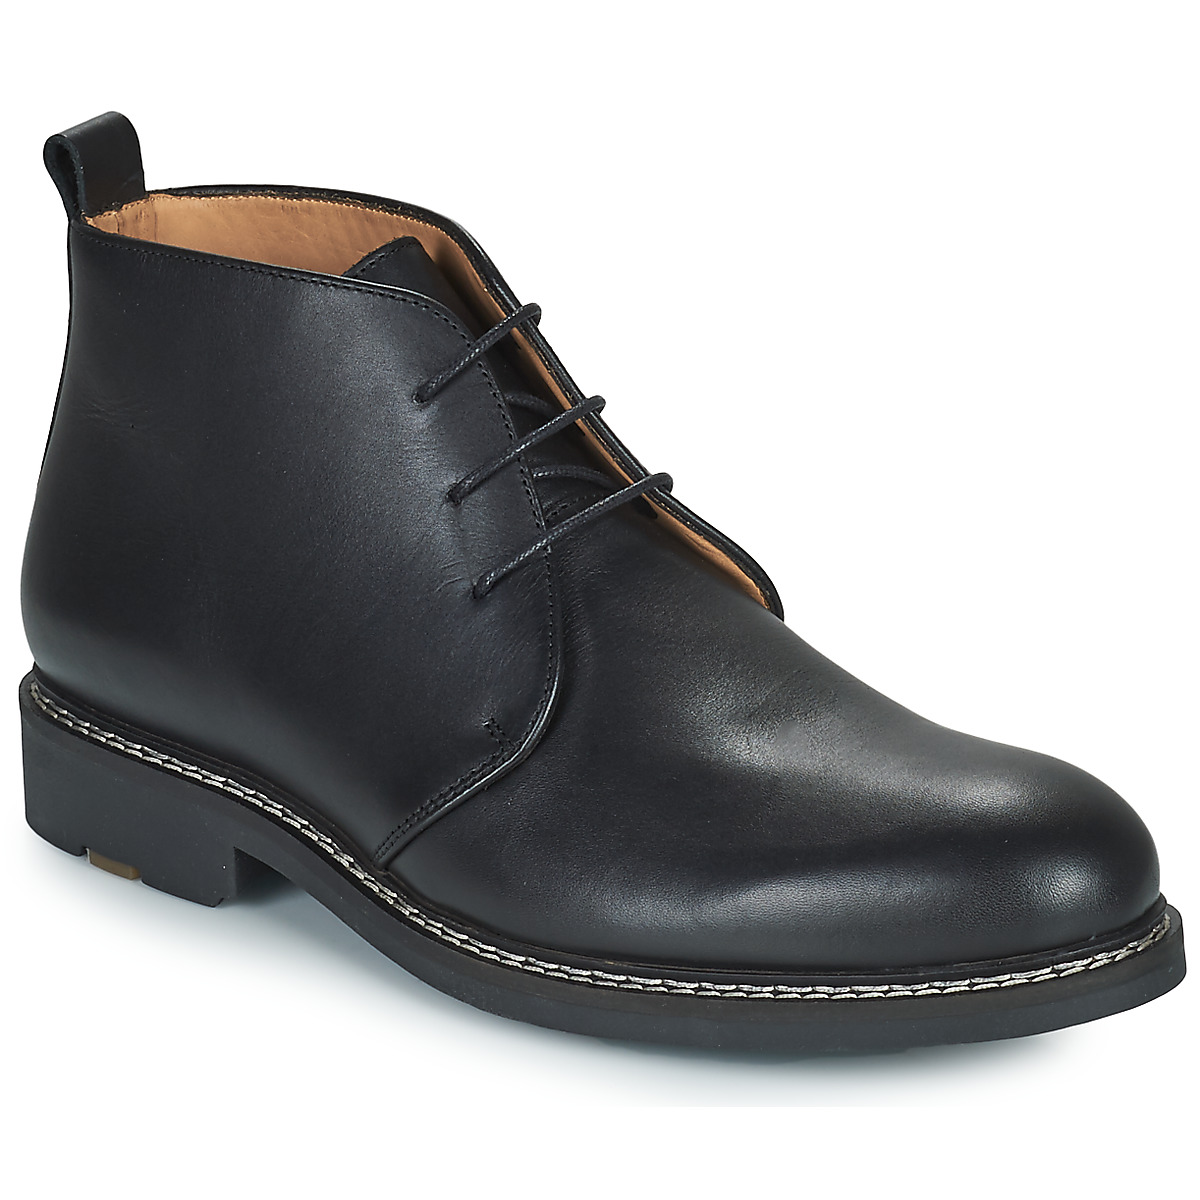 Chaussures Homme Boots Pellet MIRAGE 